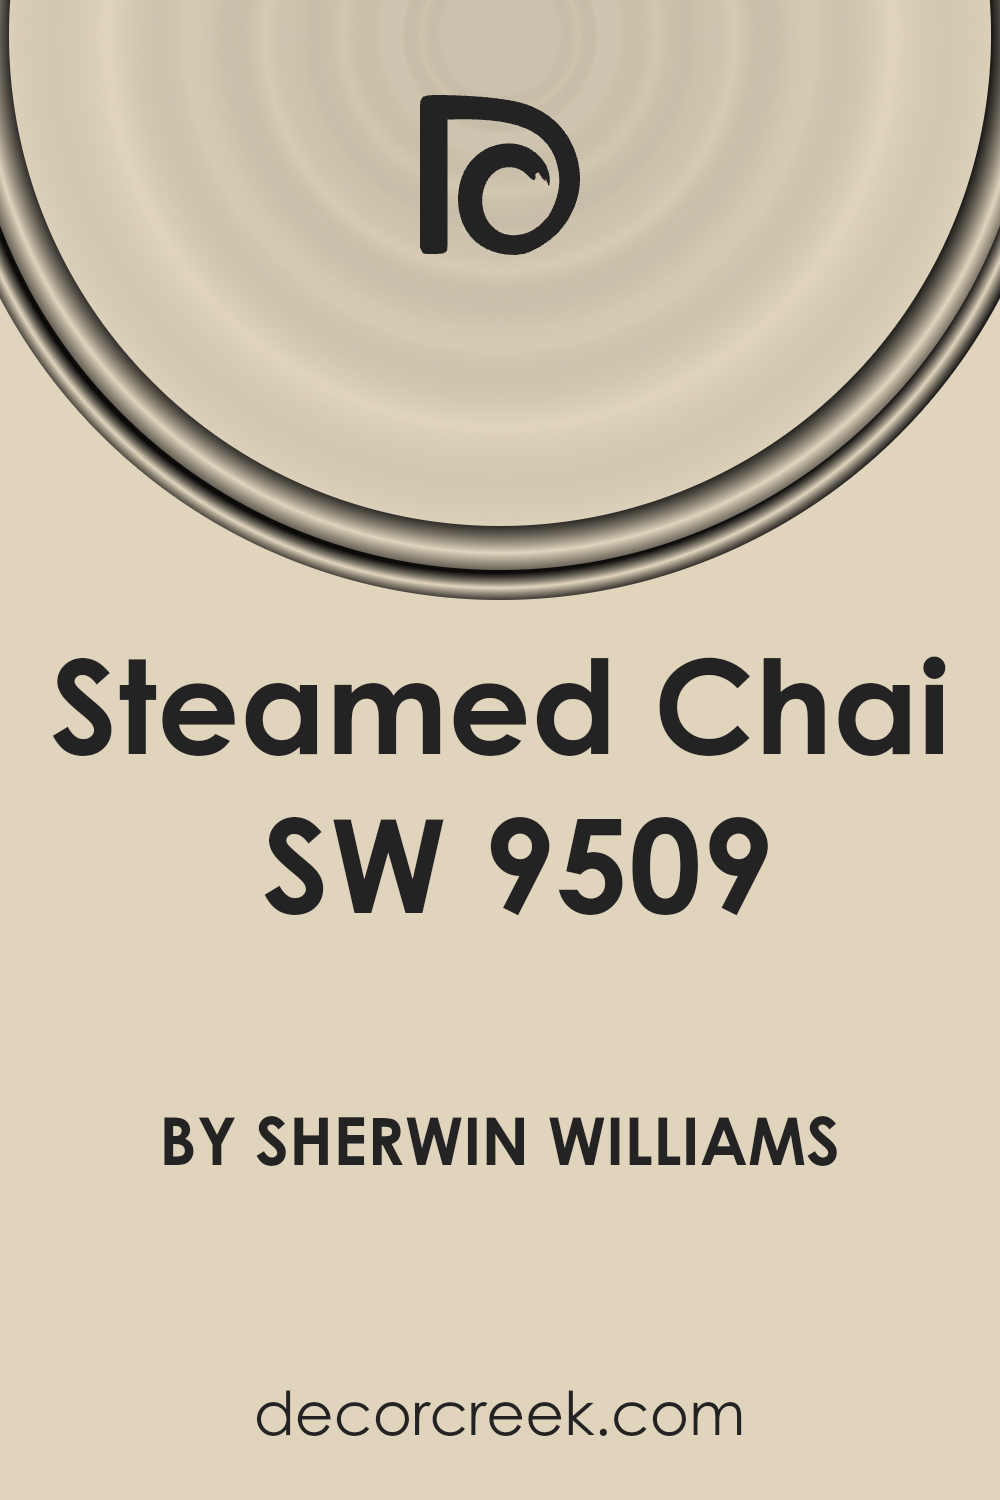 steamed_chai_sw_9509_paint_color_by_sherwin_williams